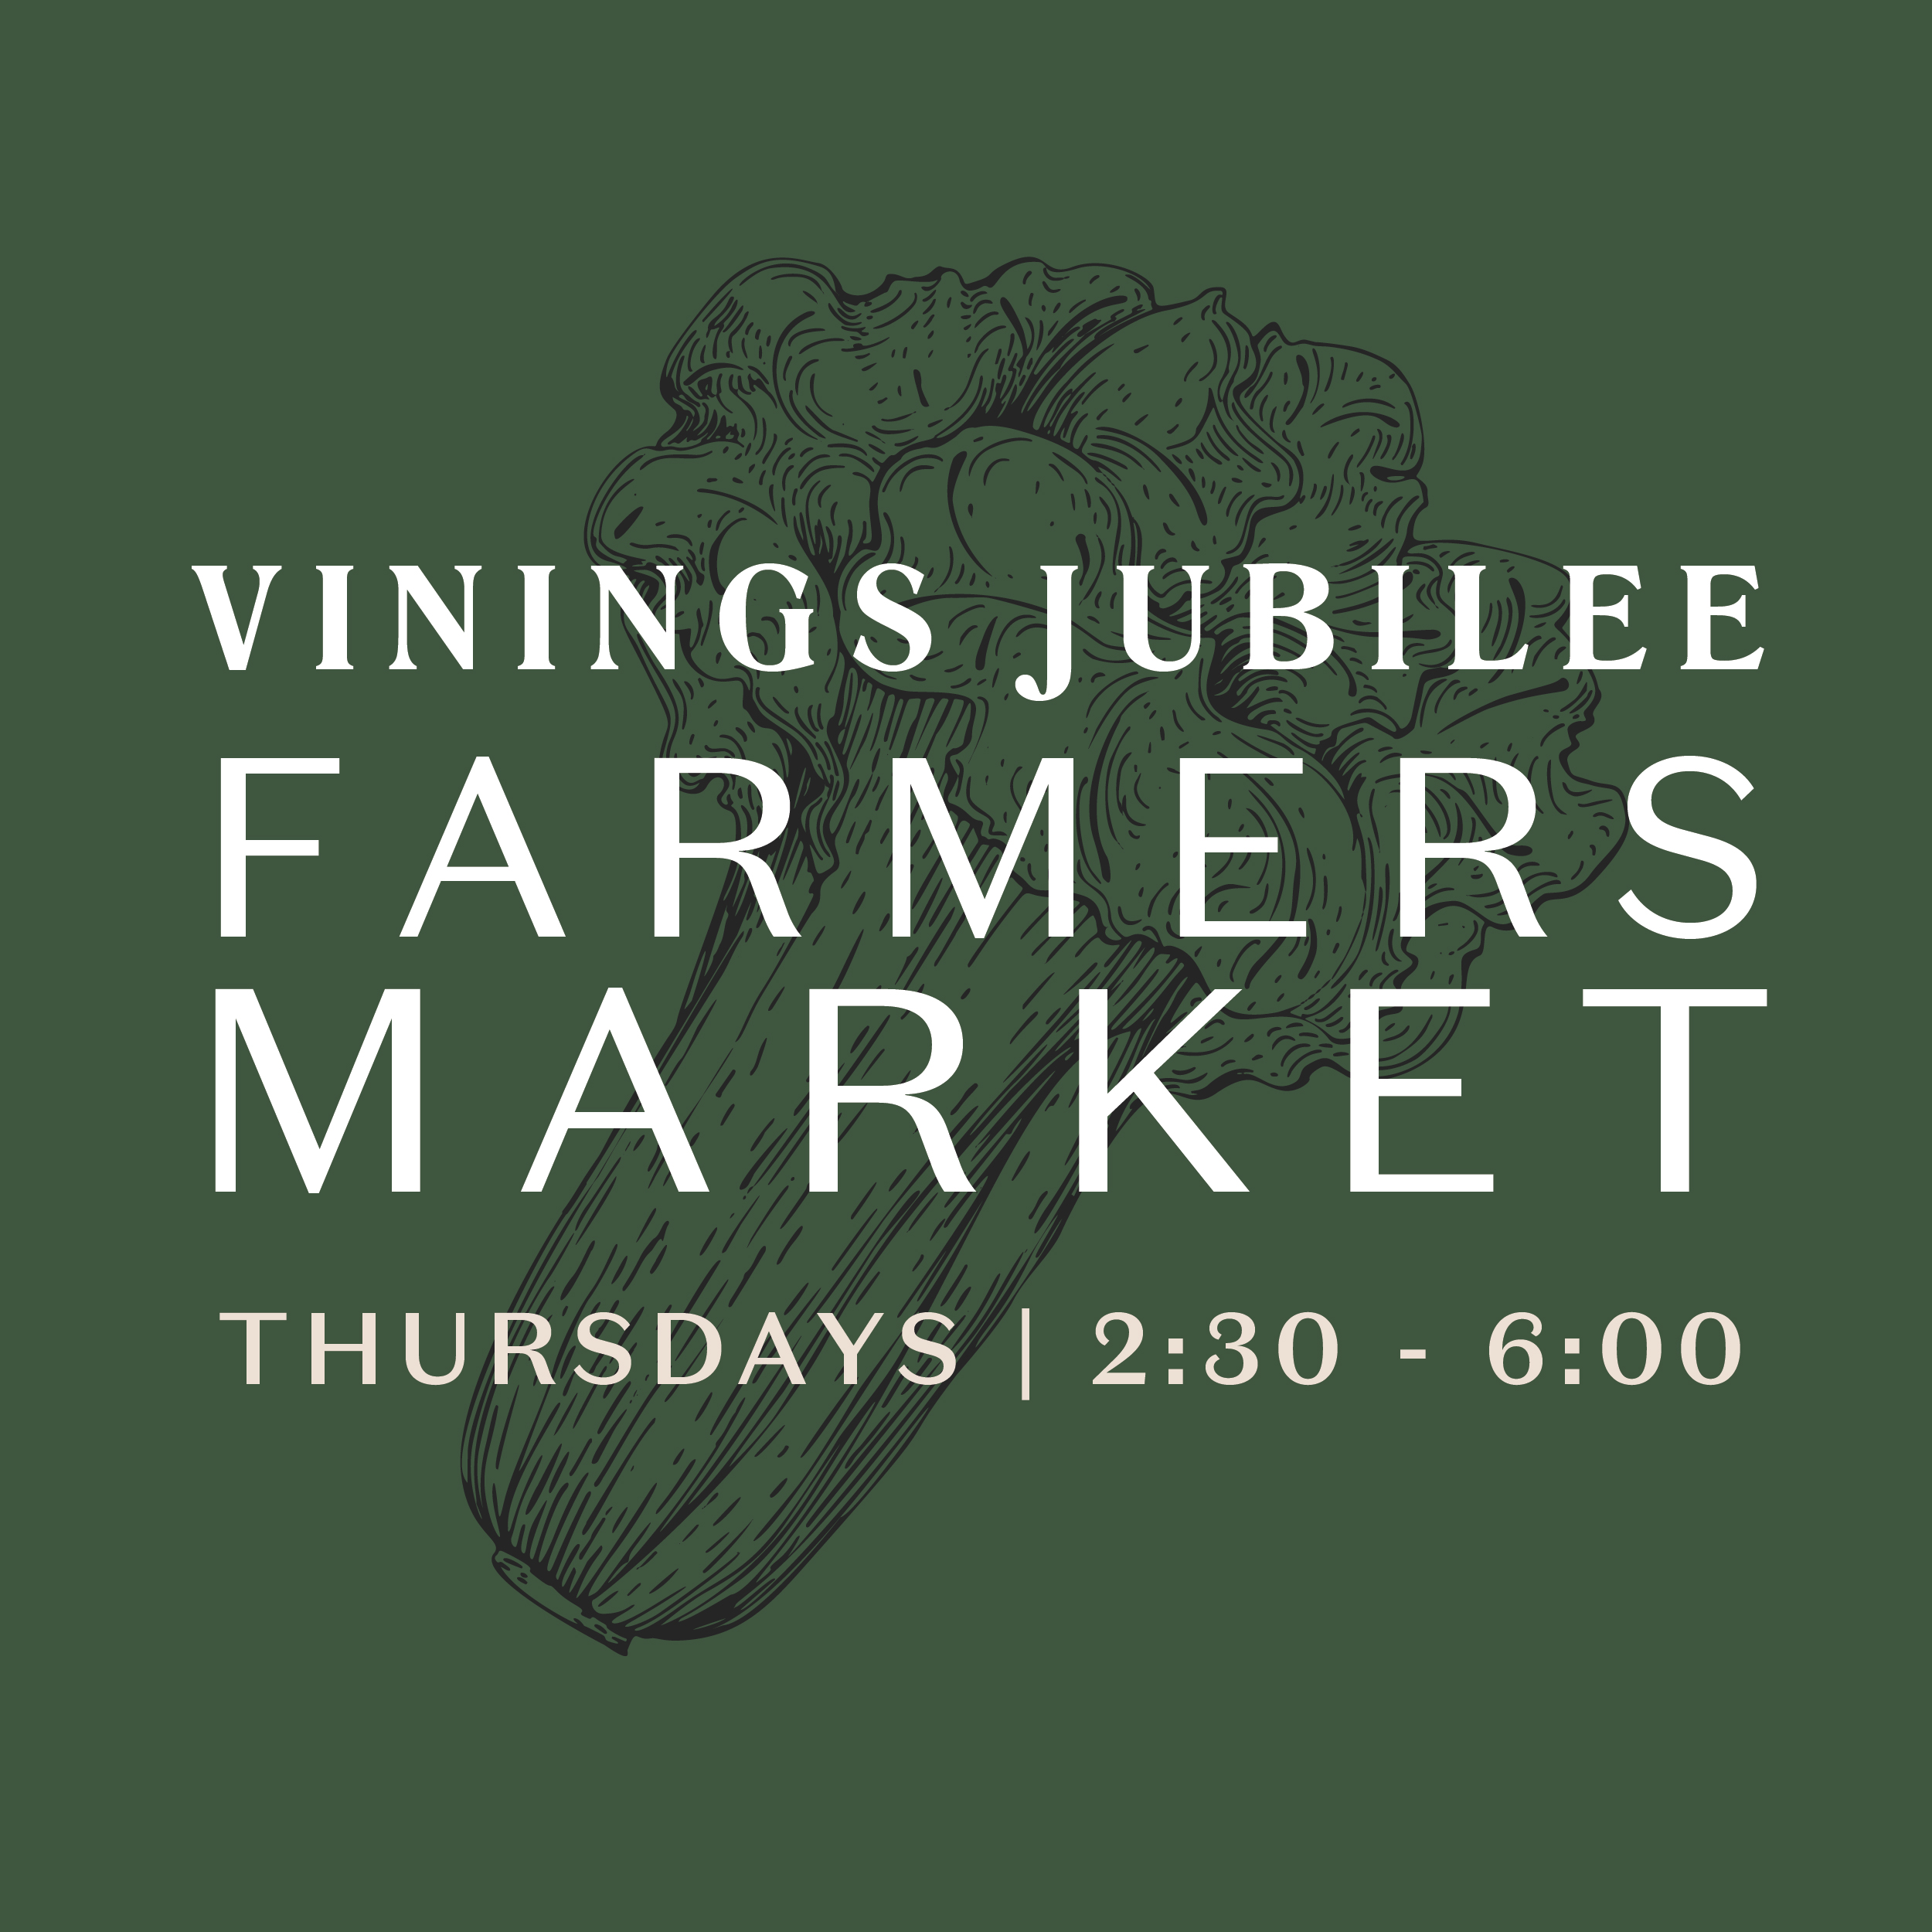 Shop Local Goods At The Vinings Jubilee Farmers Market Every Thursday!, Cobb, Georgia, United States